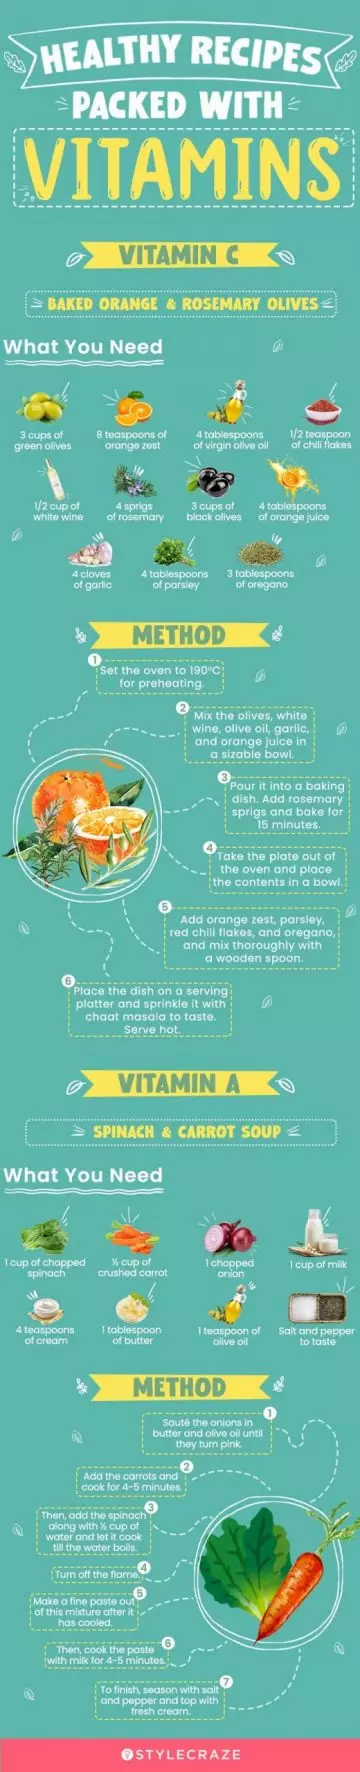 healthy recipes packed with vitamins (infographic)